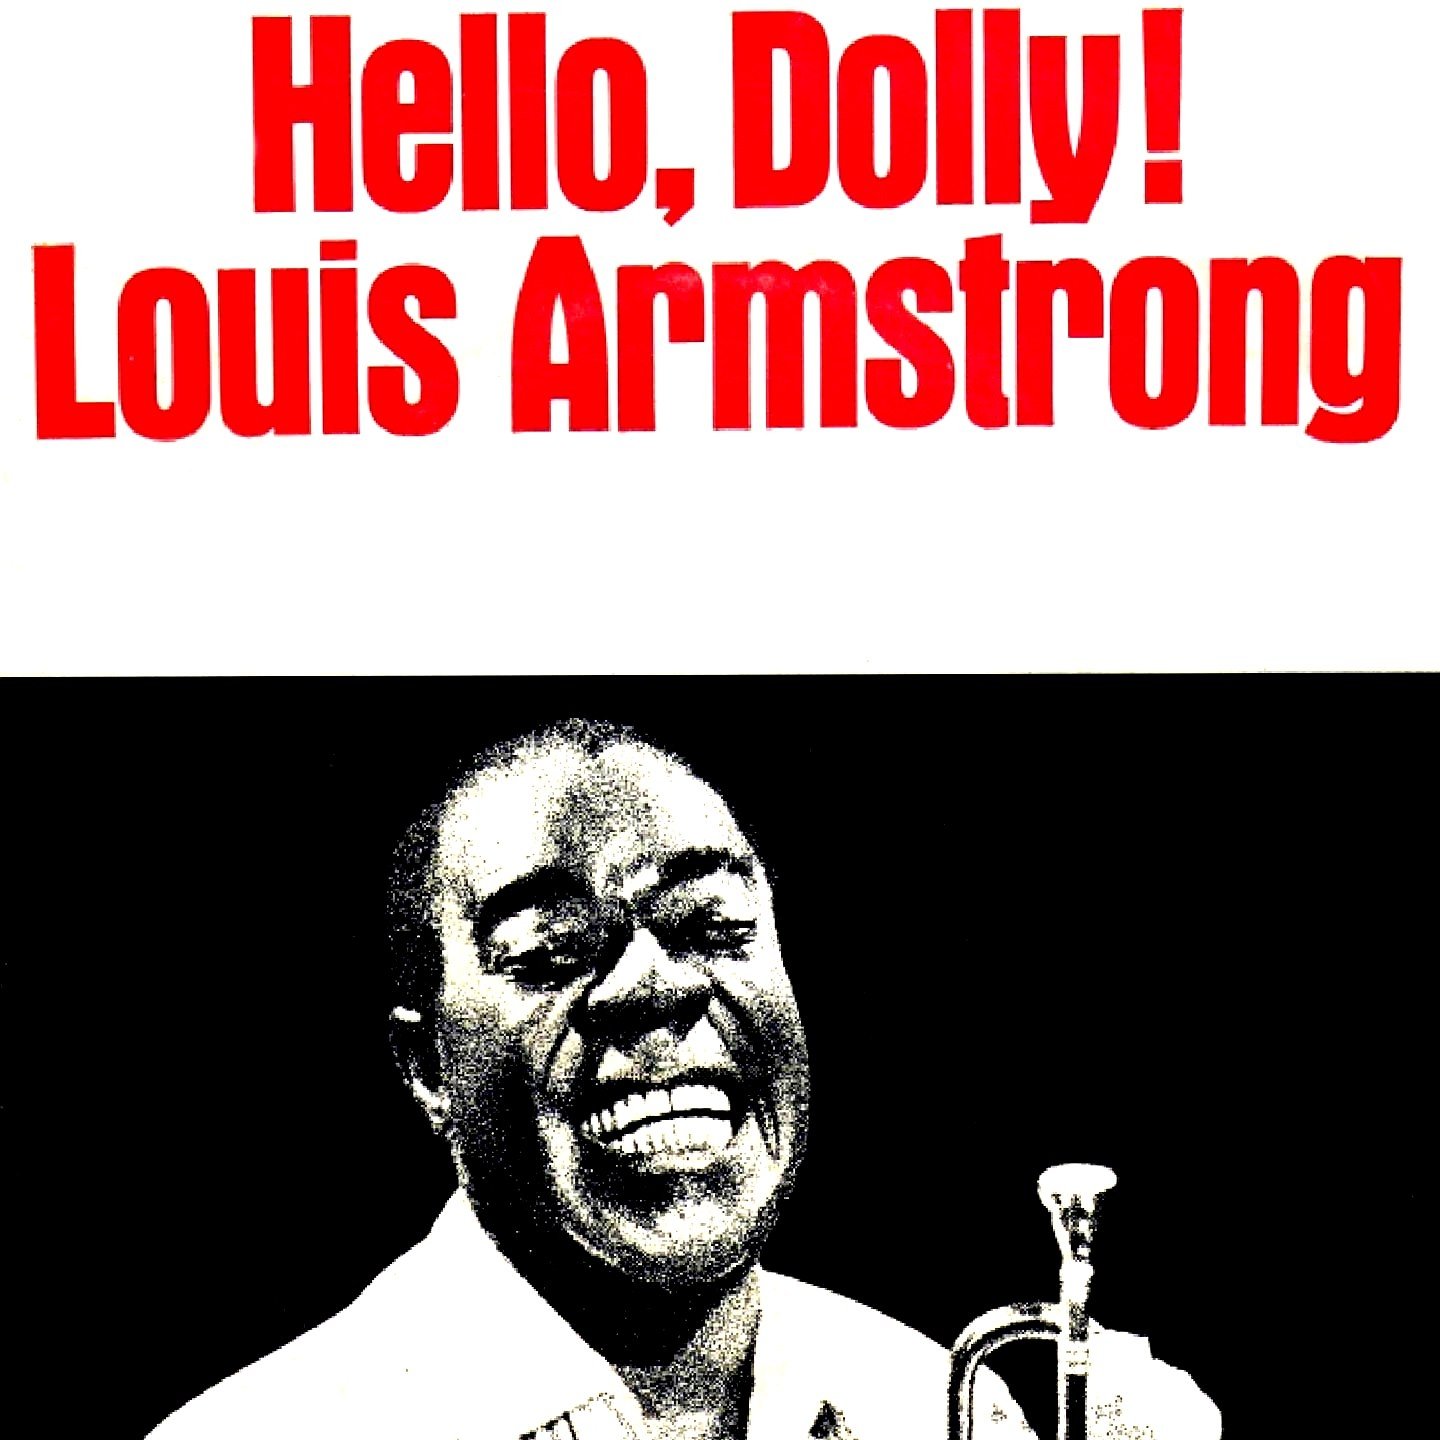 Song lyrics to Hello Dolly, music and lyrics by Jerry Herman, originally performed in the musical of the same name, recorded by Louis Armstrong